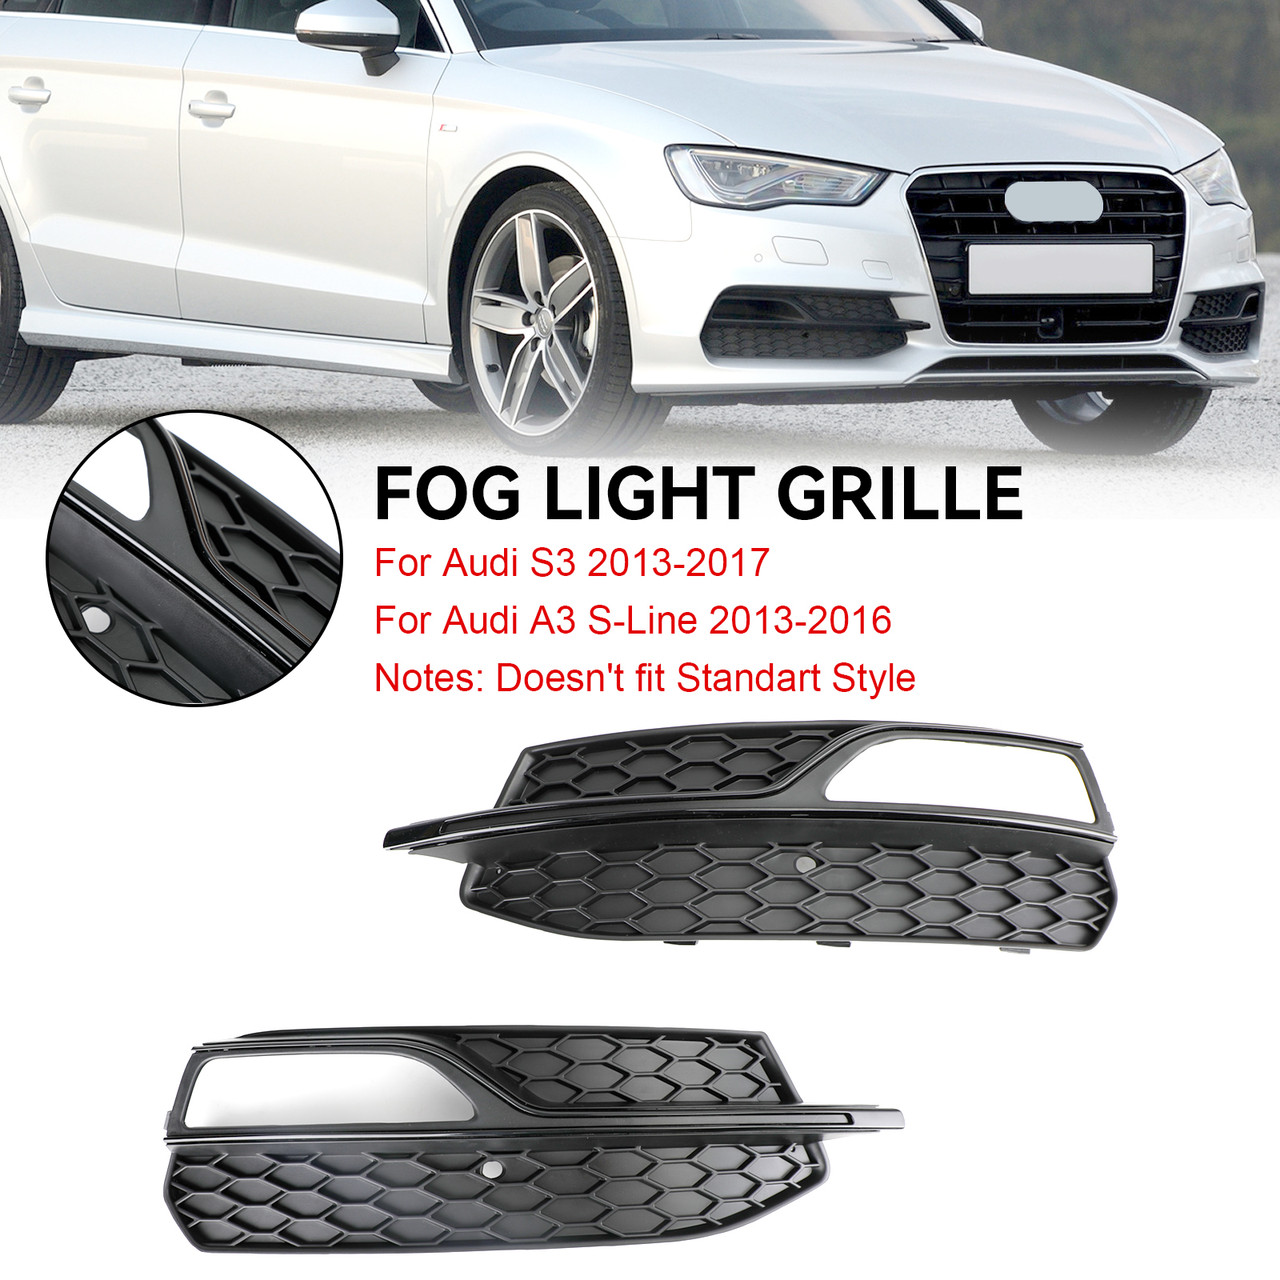 2013-2016 AUDI A3 S3 S-Line Lower Bumper Fog Light Cover Grill Grille